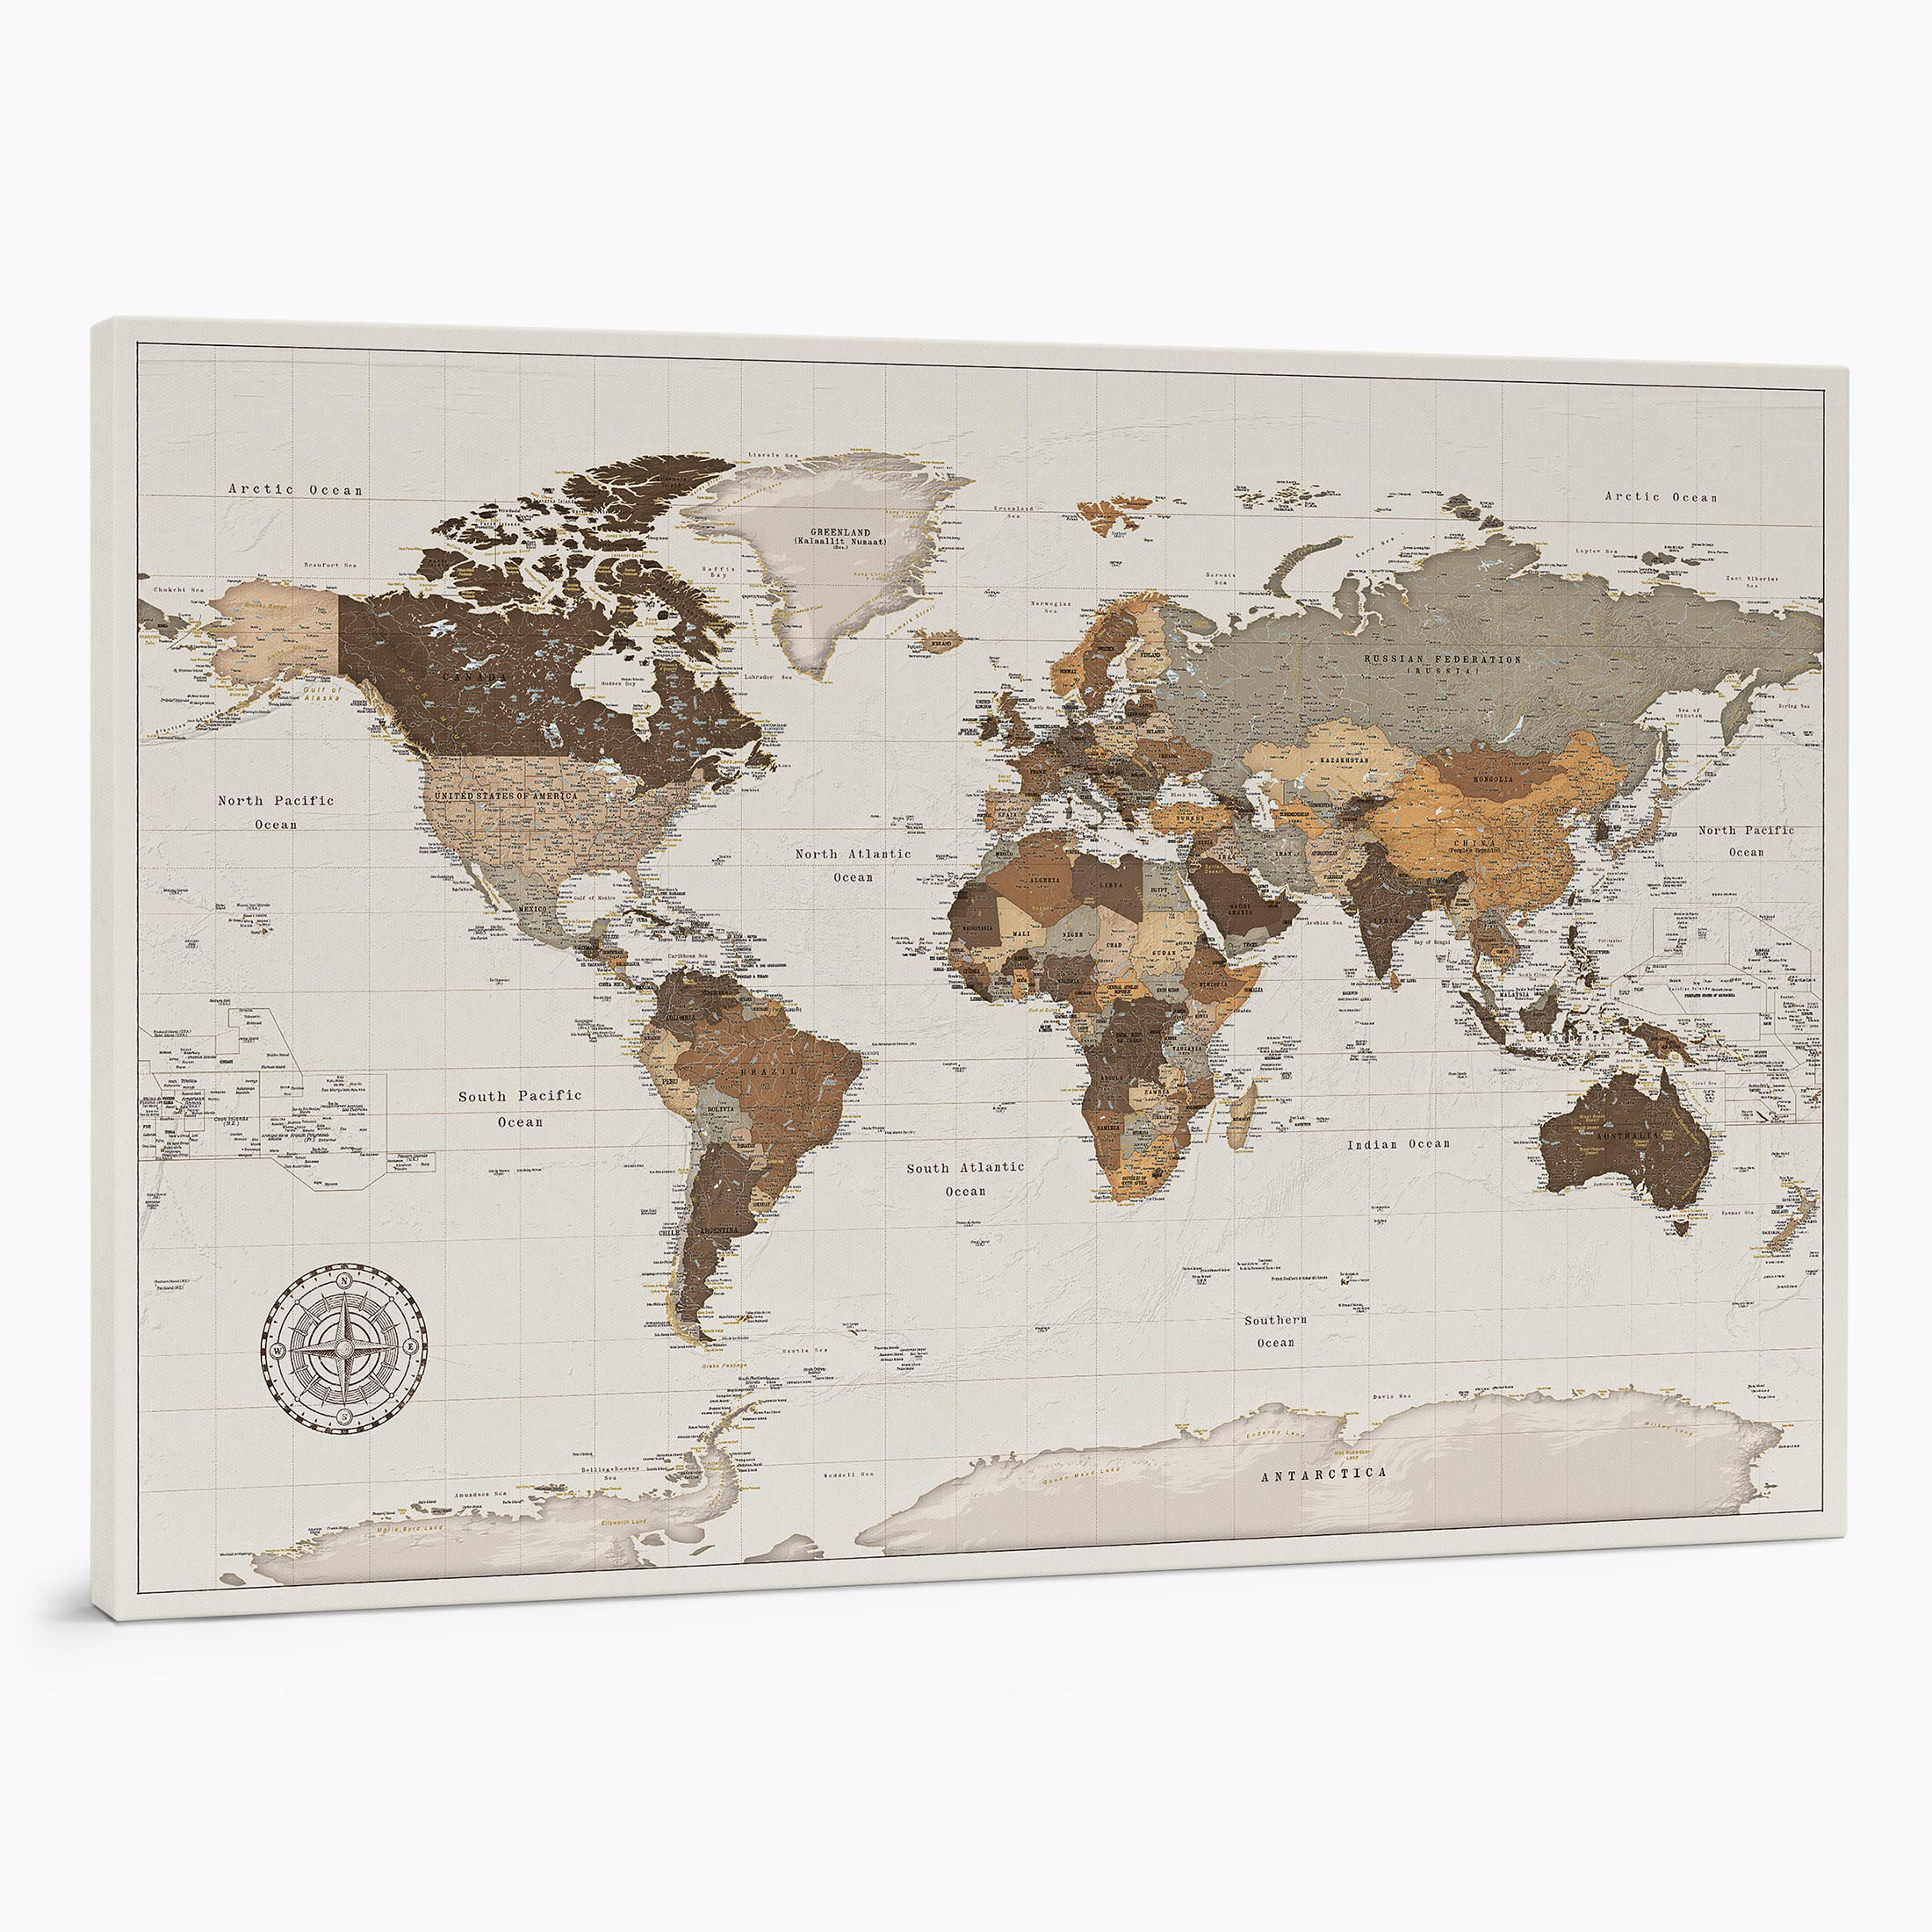 29P large push pin world map to track places visited on canvas safari brown